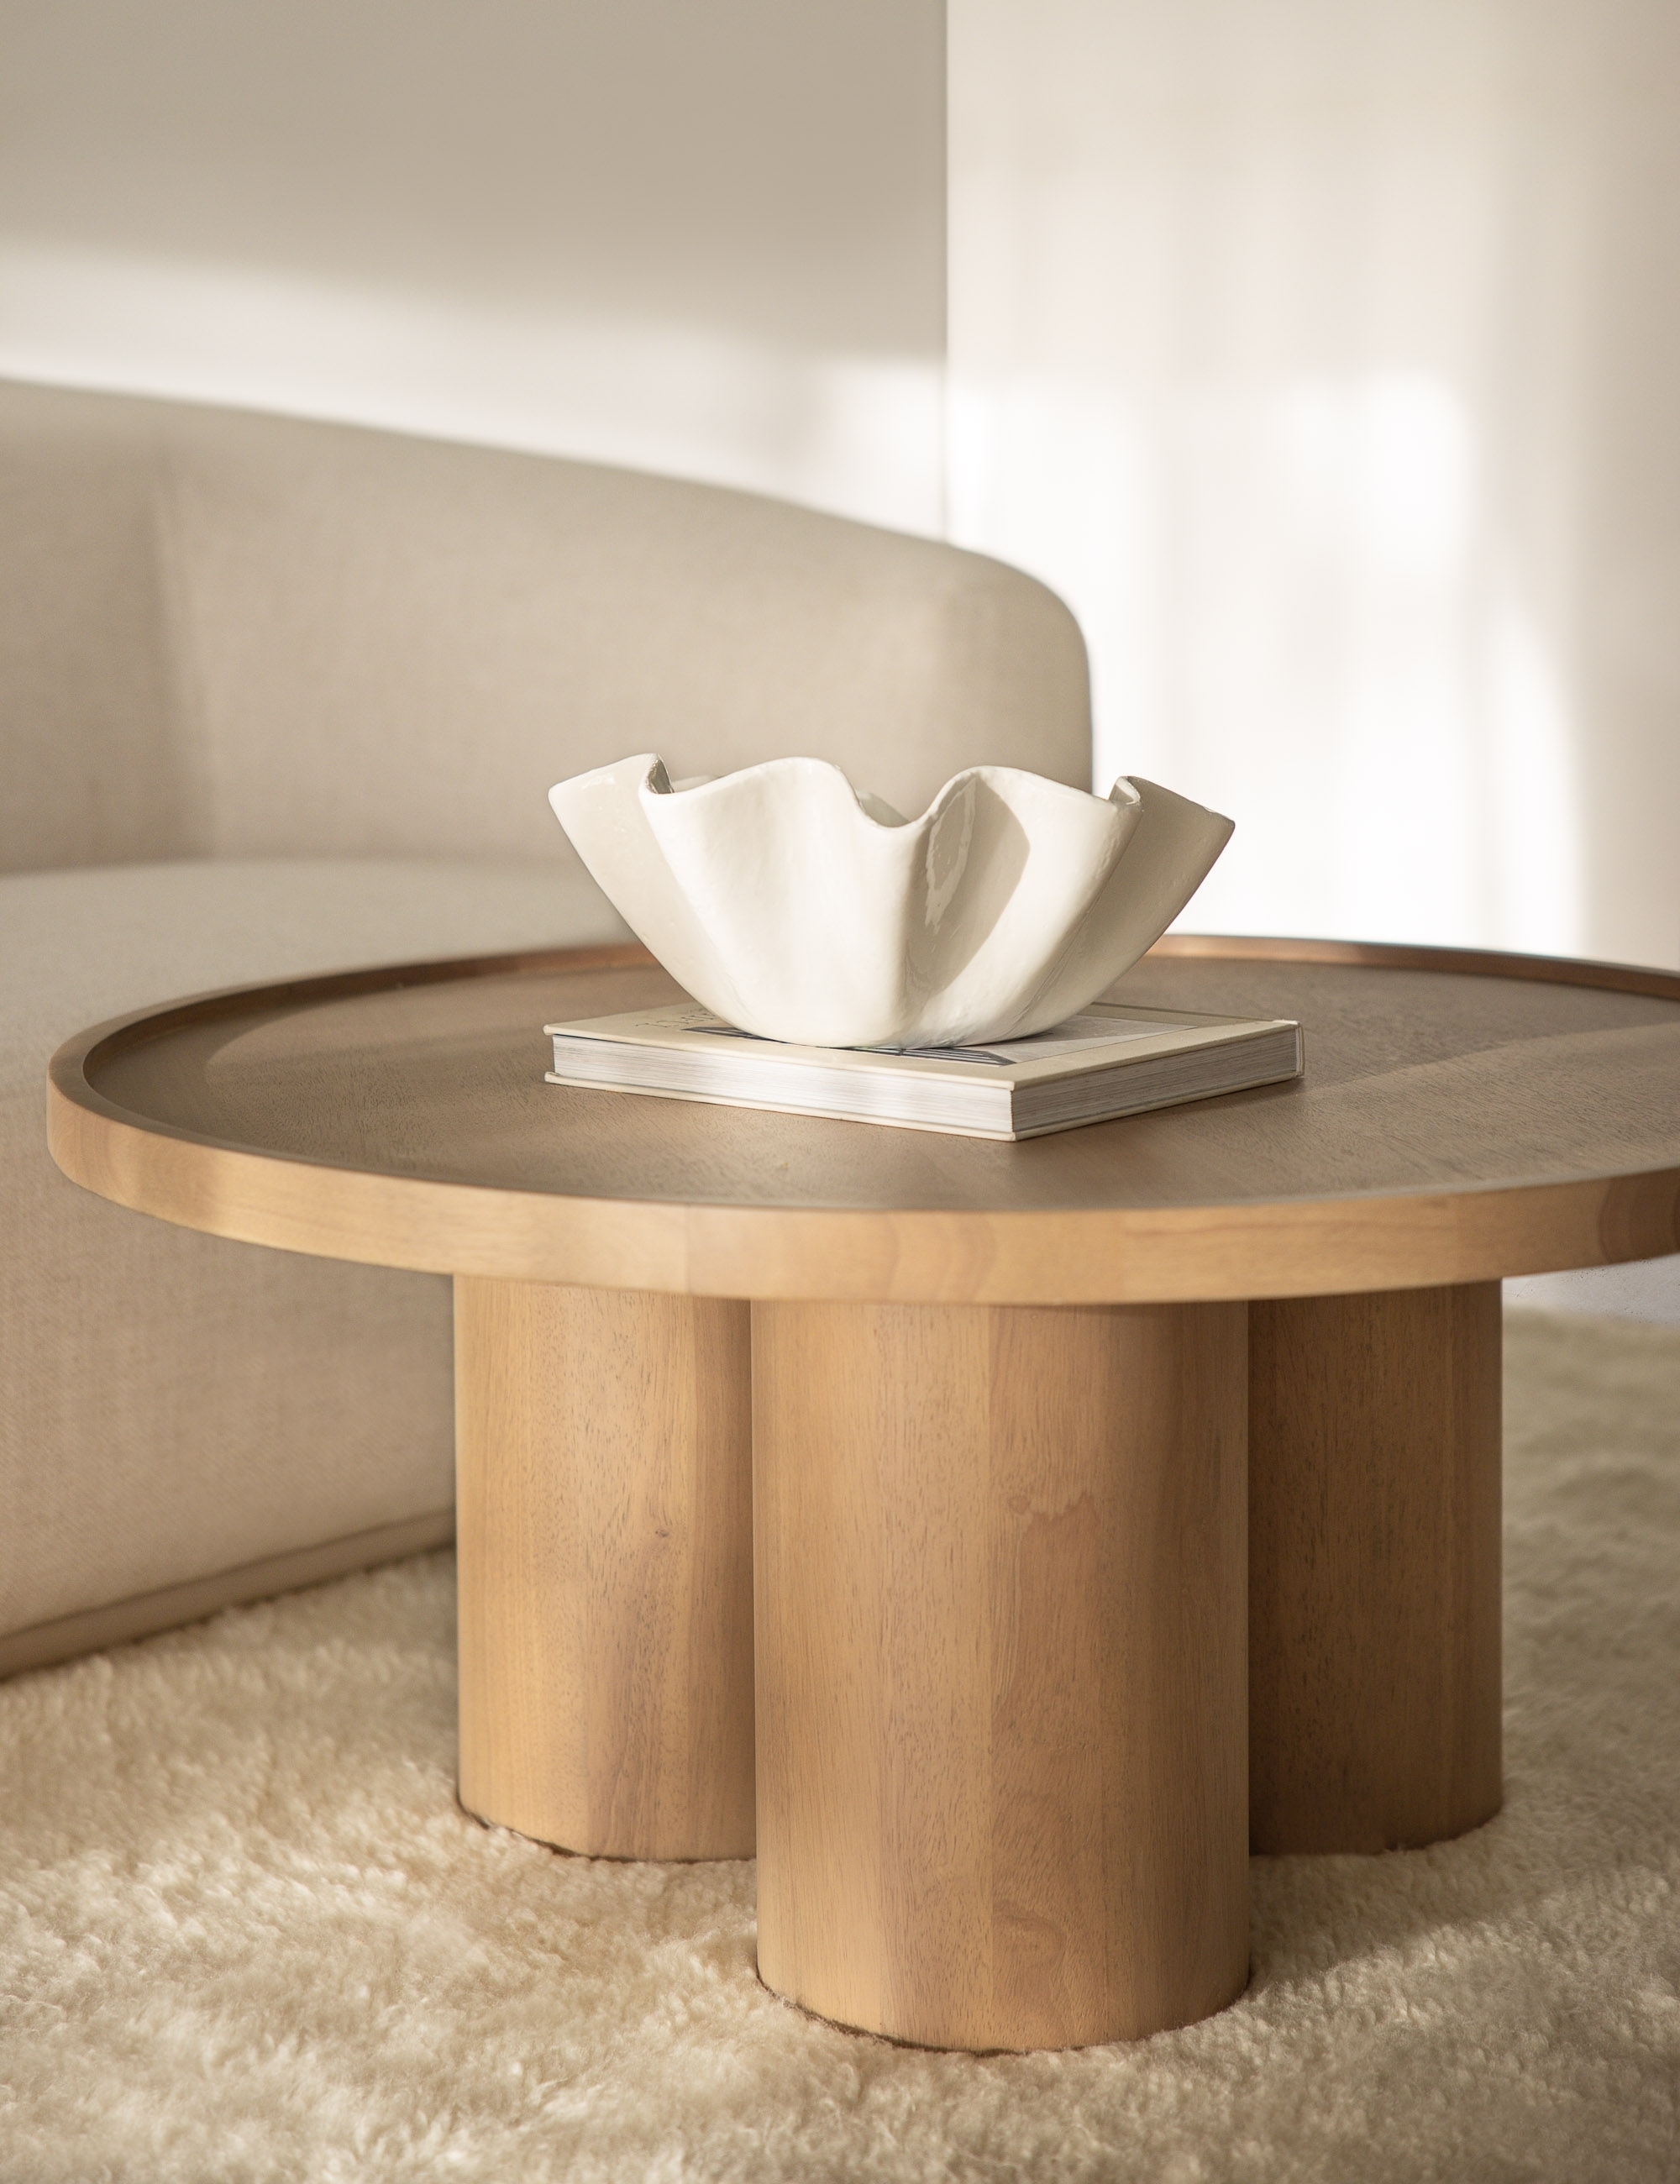 Delta Round Coffee Table - Image 3